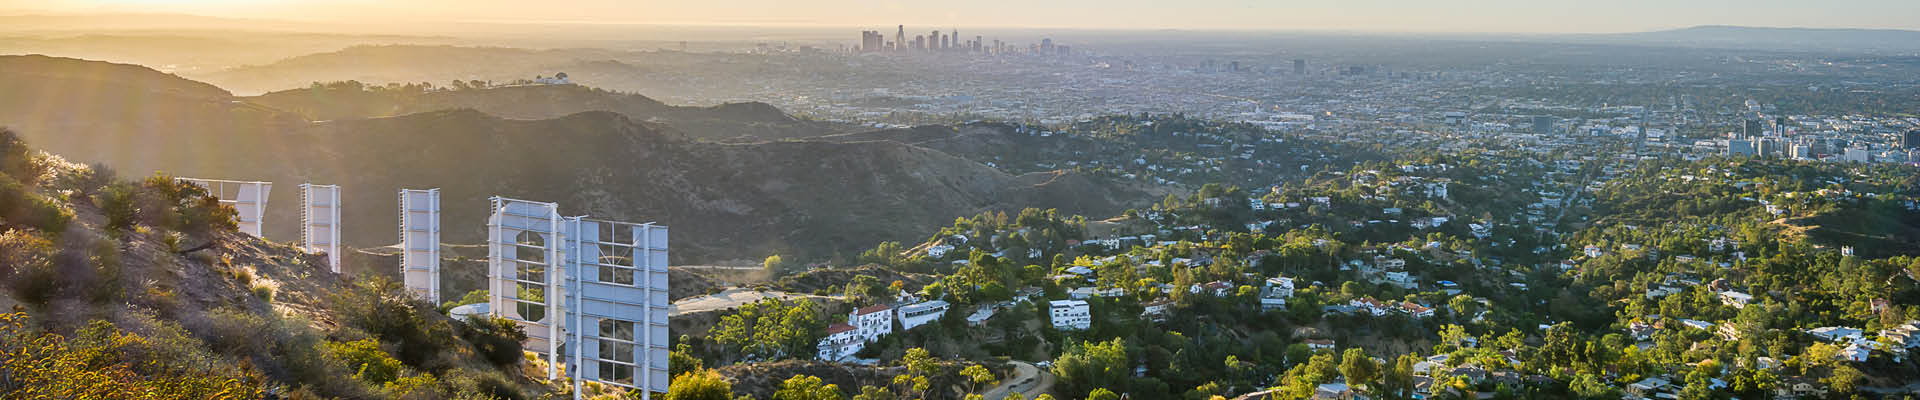 Hollywood in Los Angeles